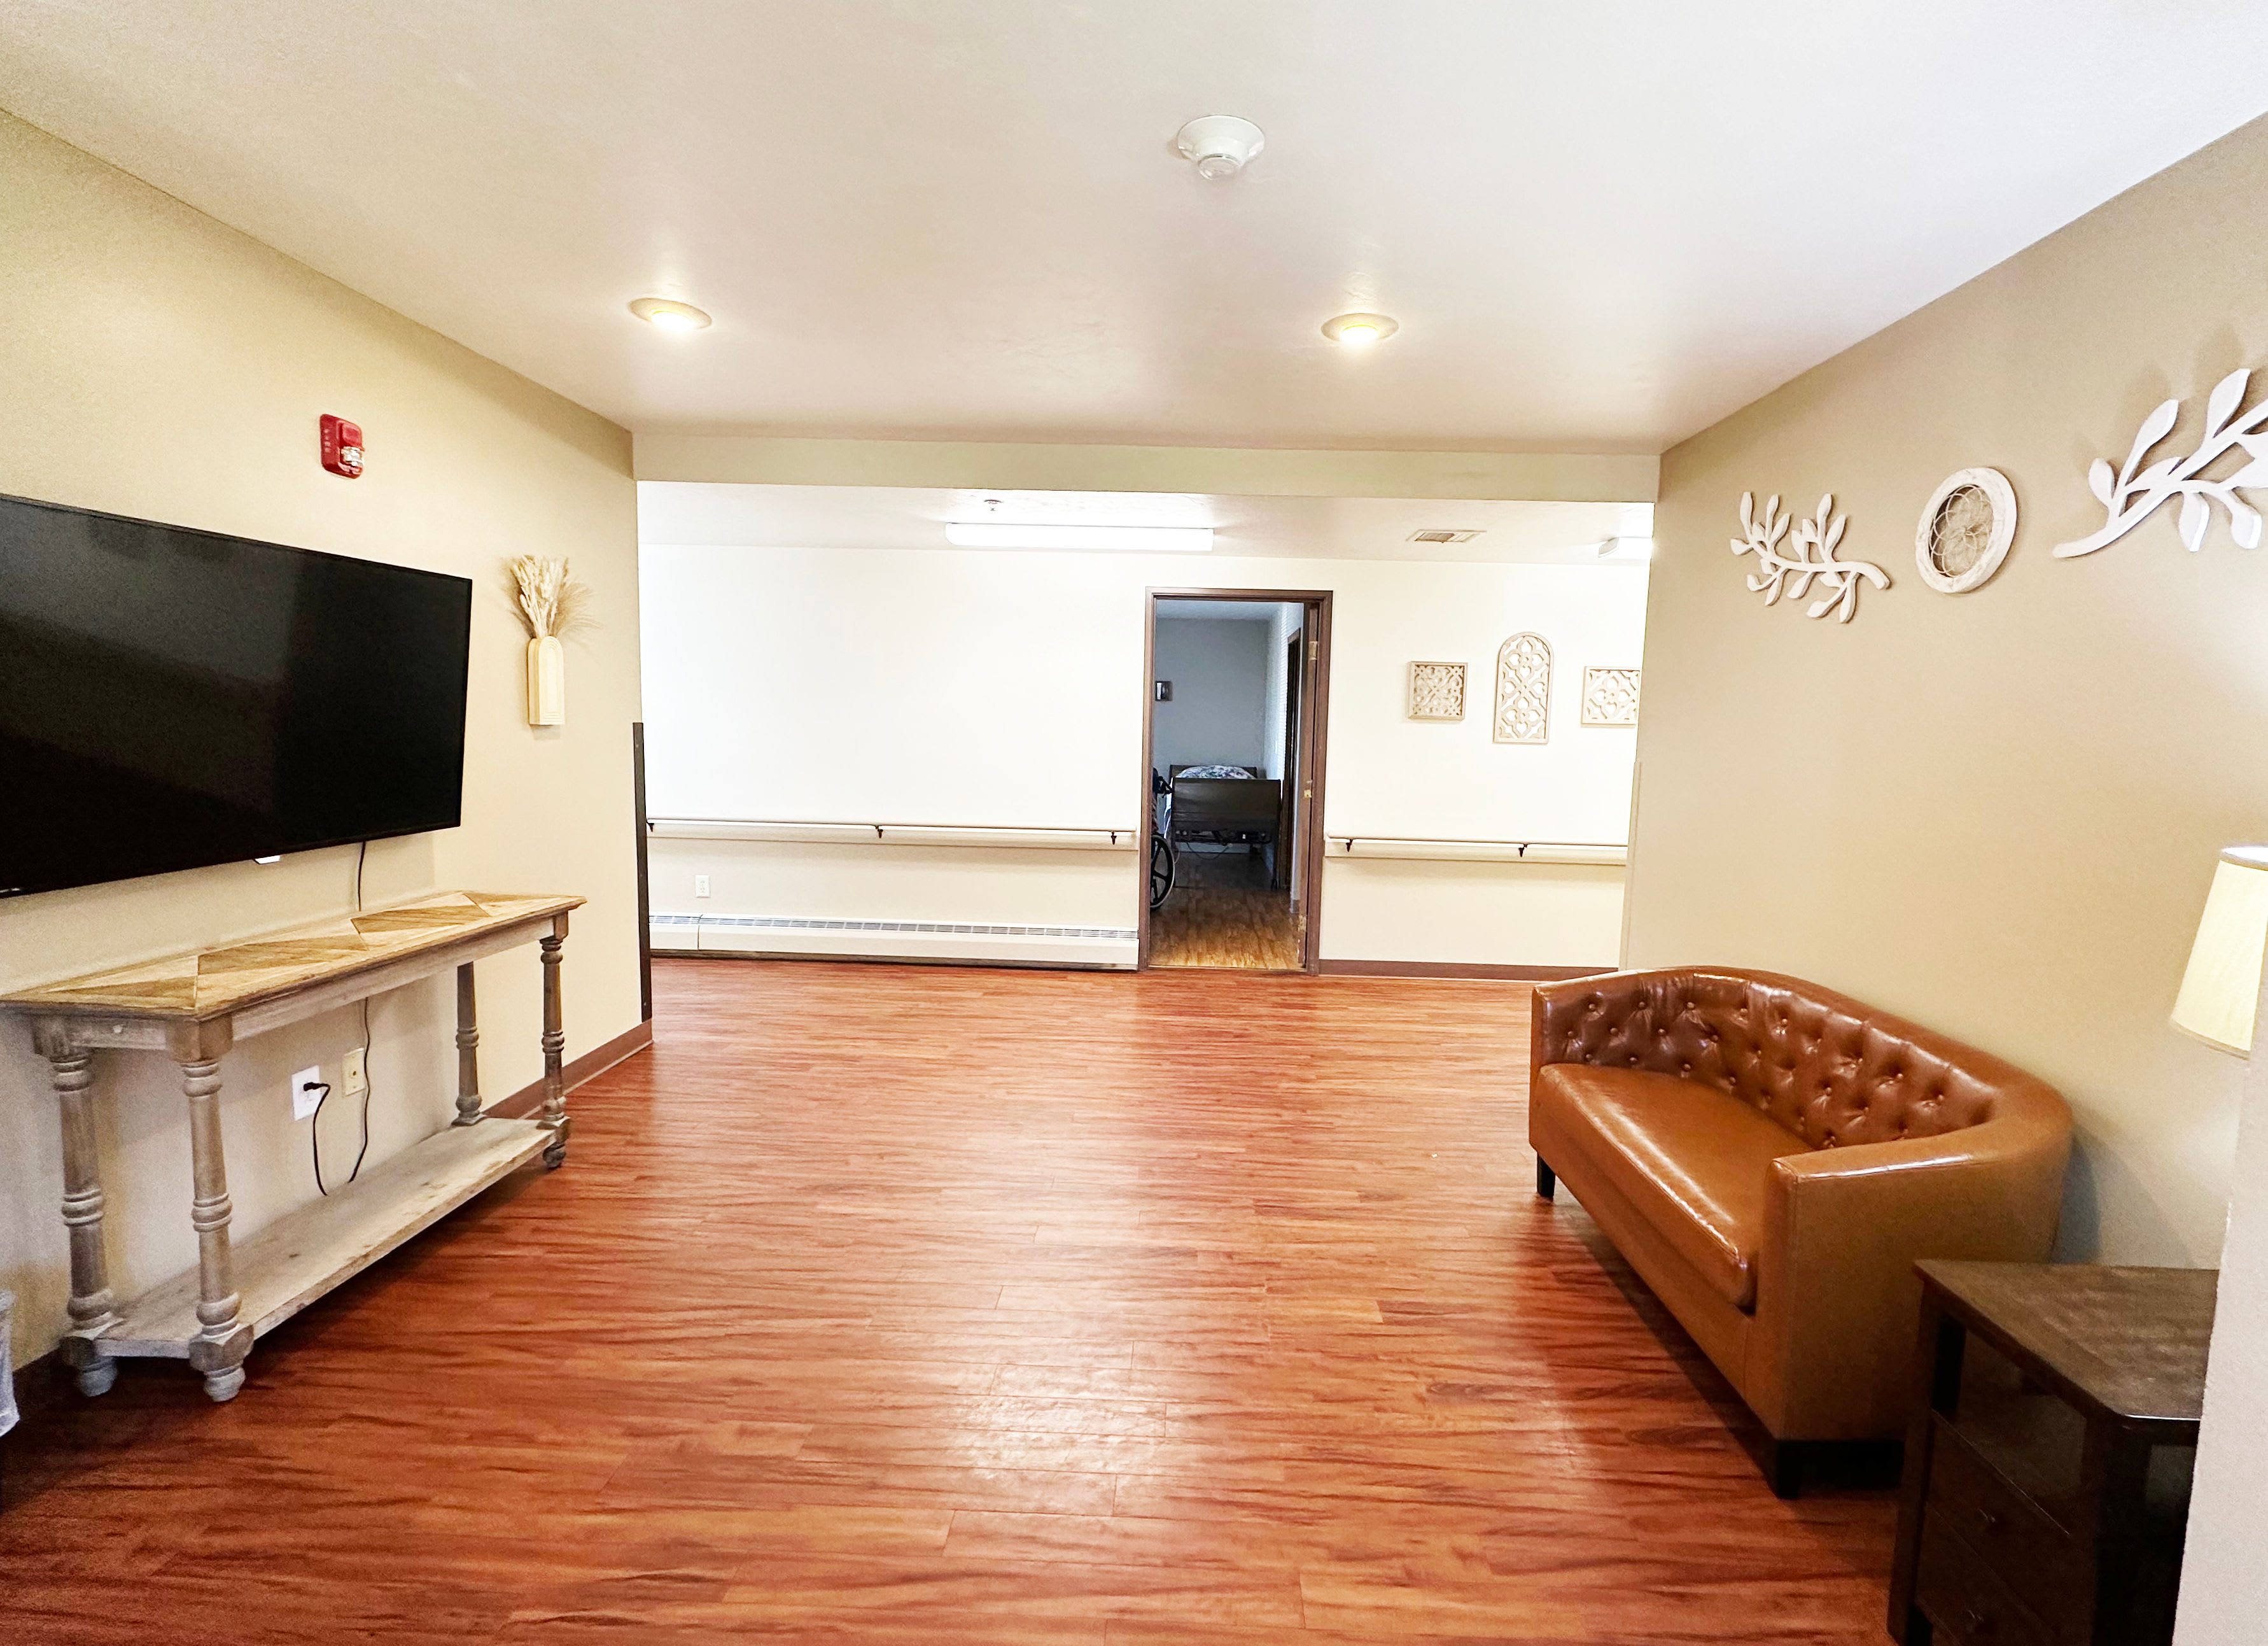 Lounge at Wyndemere Memory Care in Green Bay, Wisconsin. 